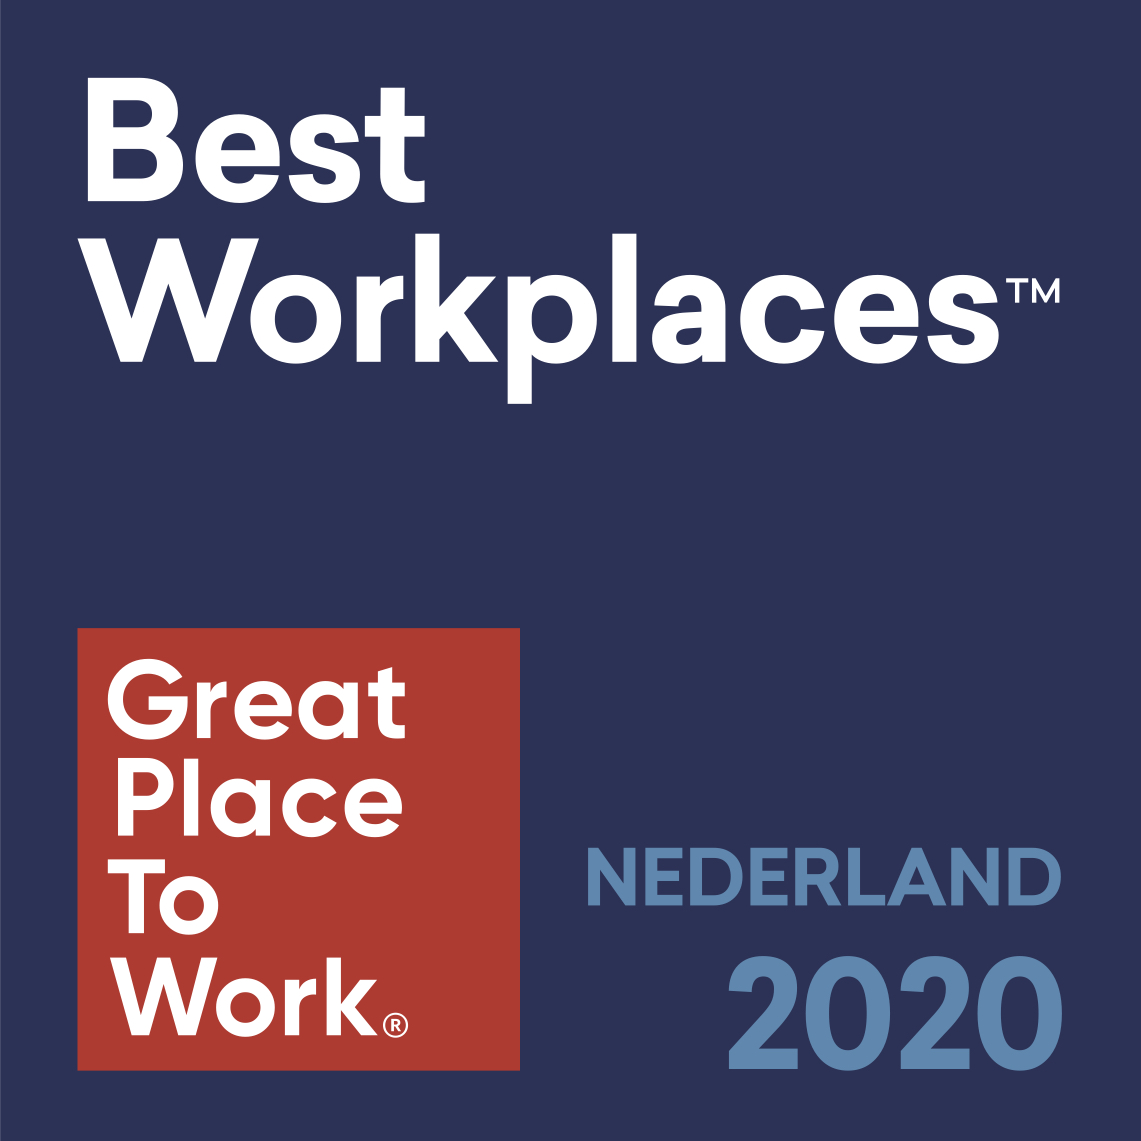 Great Place To Work onthult Best Workplaces 2020 - Emerce